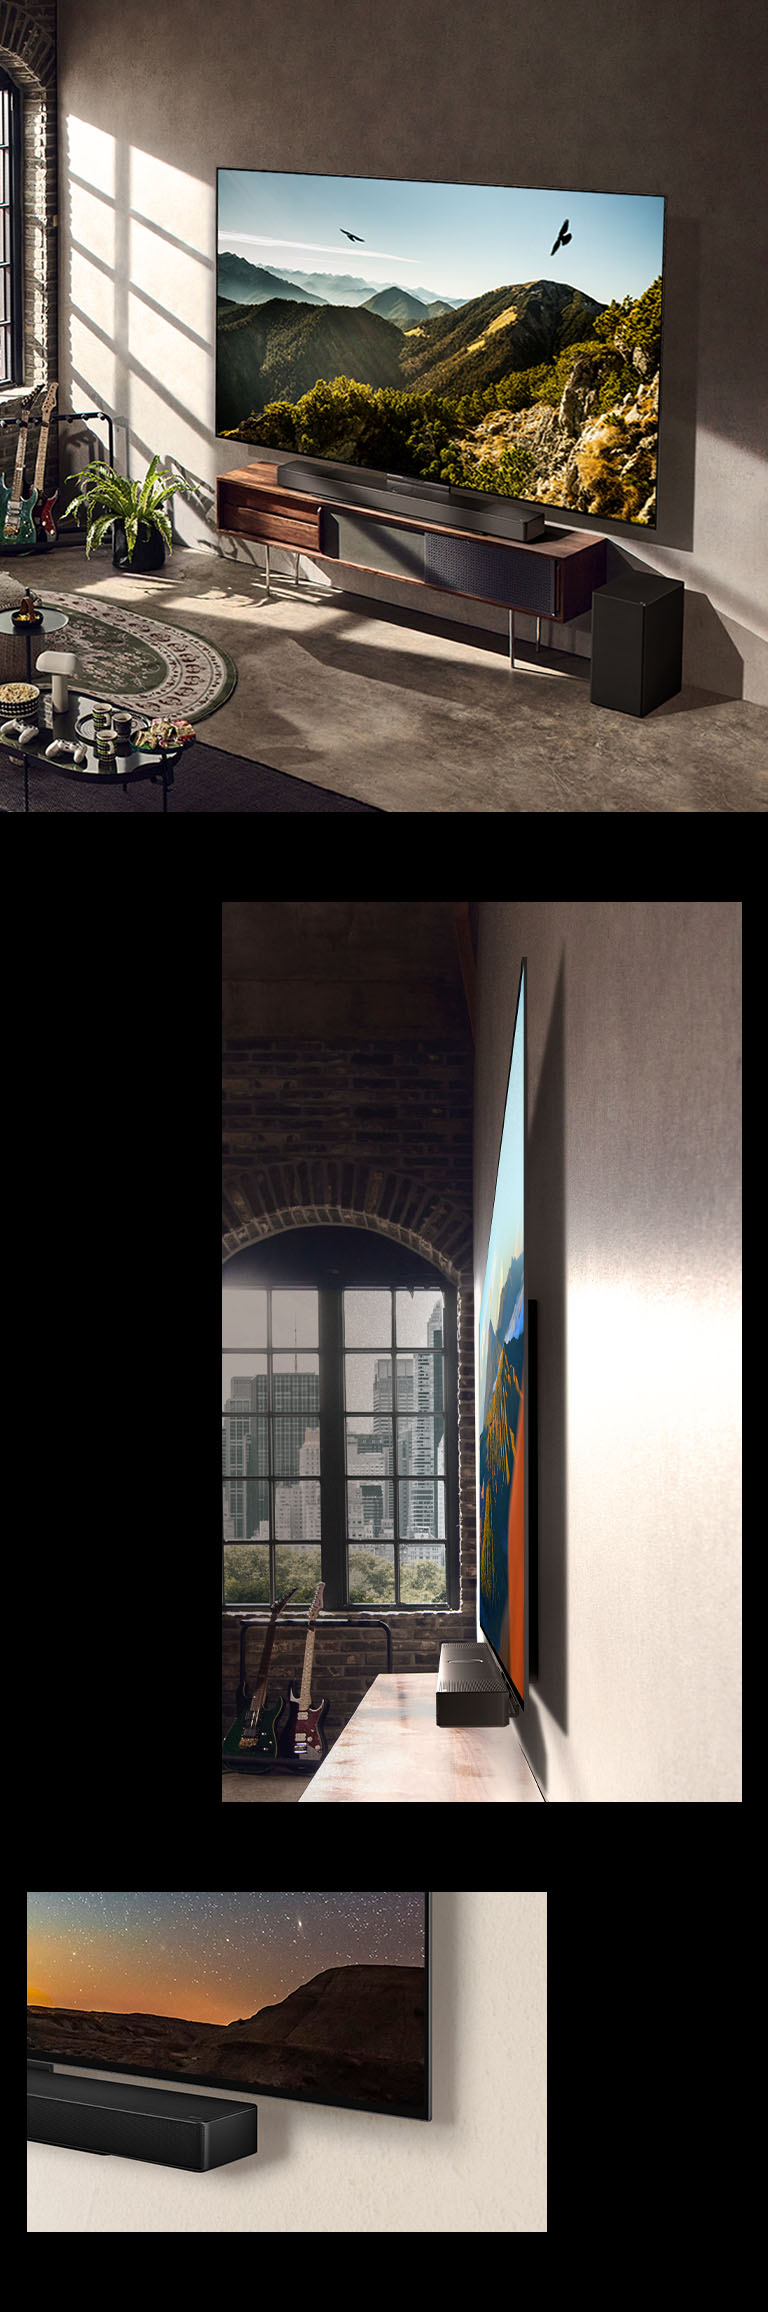 An image of LG OLED C3 with a Soundbar on the wall in an artistic room. A side view of LG OLED C3's thin dimensions in front of a window overlooking a cityscape. The bottom corner of LG OLED C3 and Soundbar.